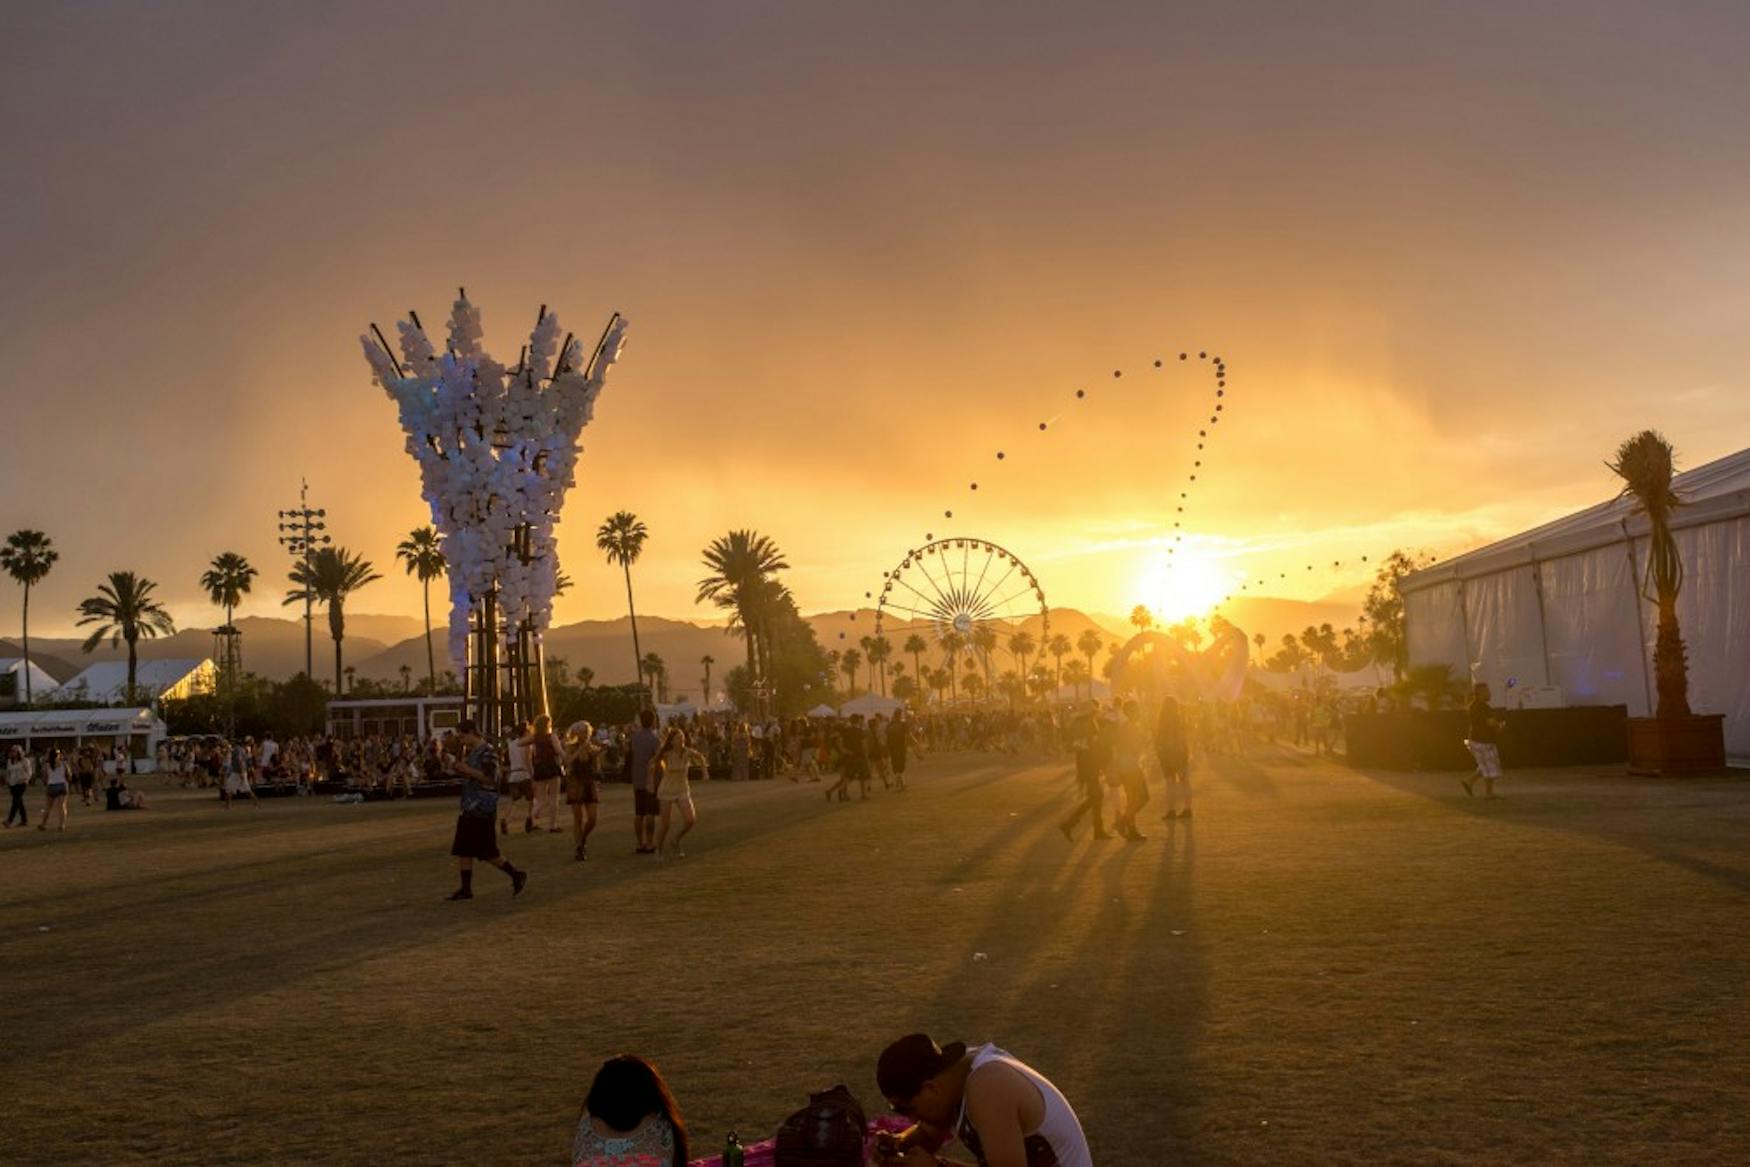 THE NEW WOODSTOCK: Musical festivals like Coachella (above) are expanding quickly.